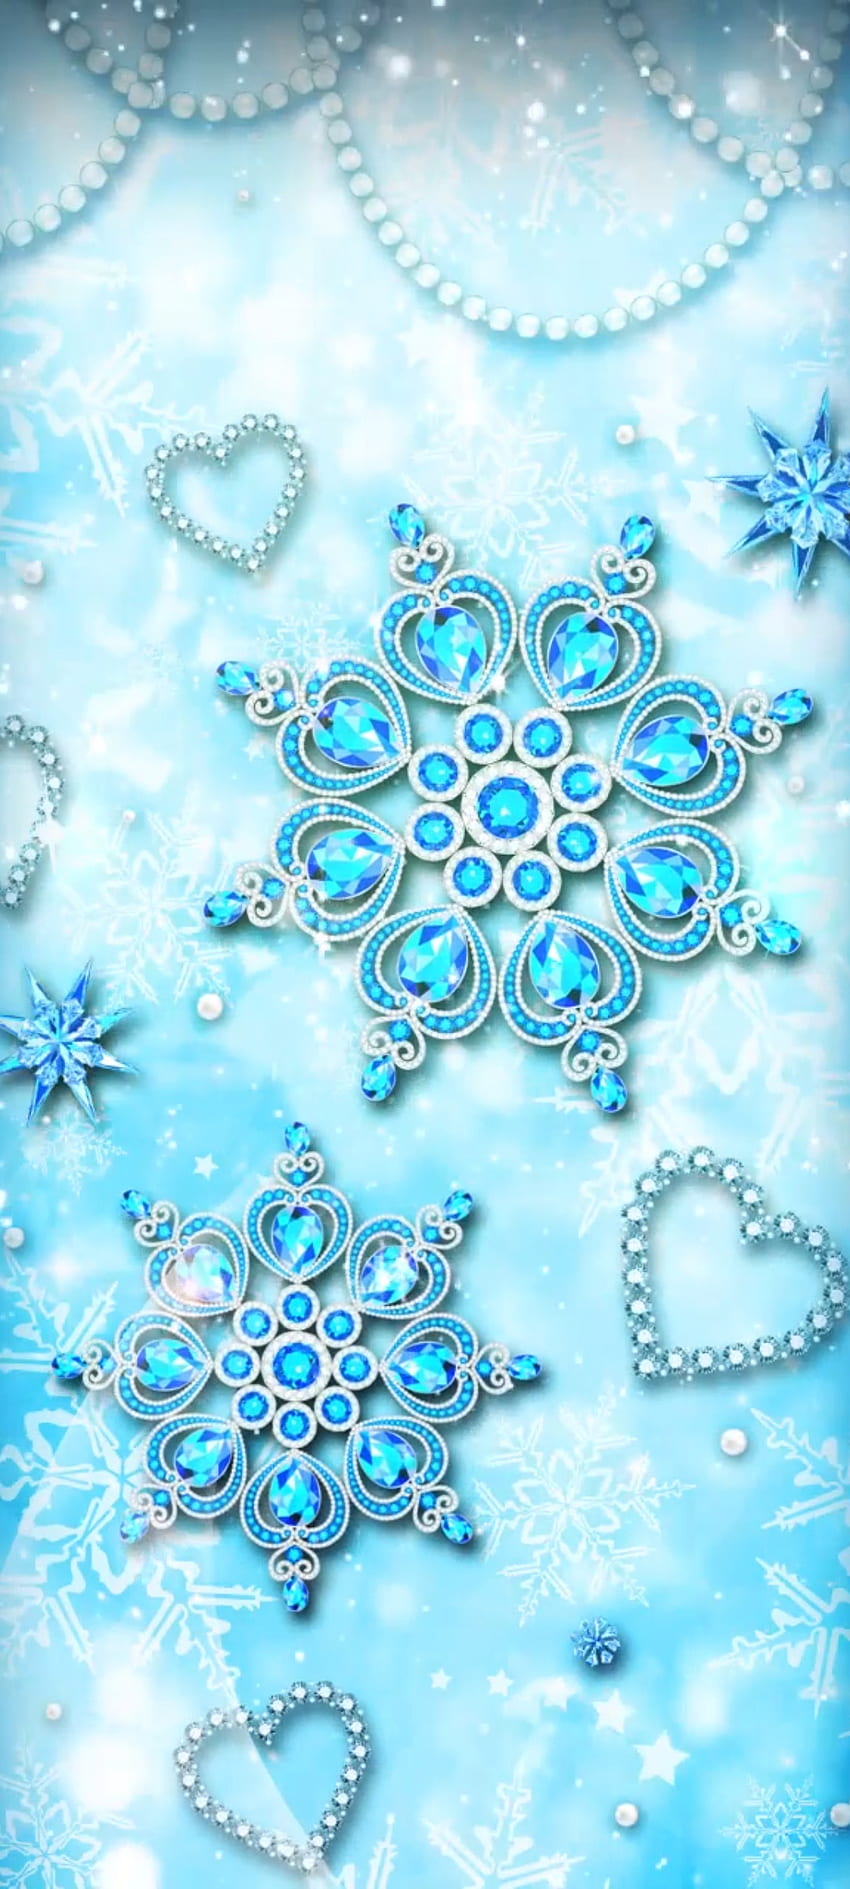 Snowflake Pattern Background iPhone Wallpapers Free Download